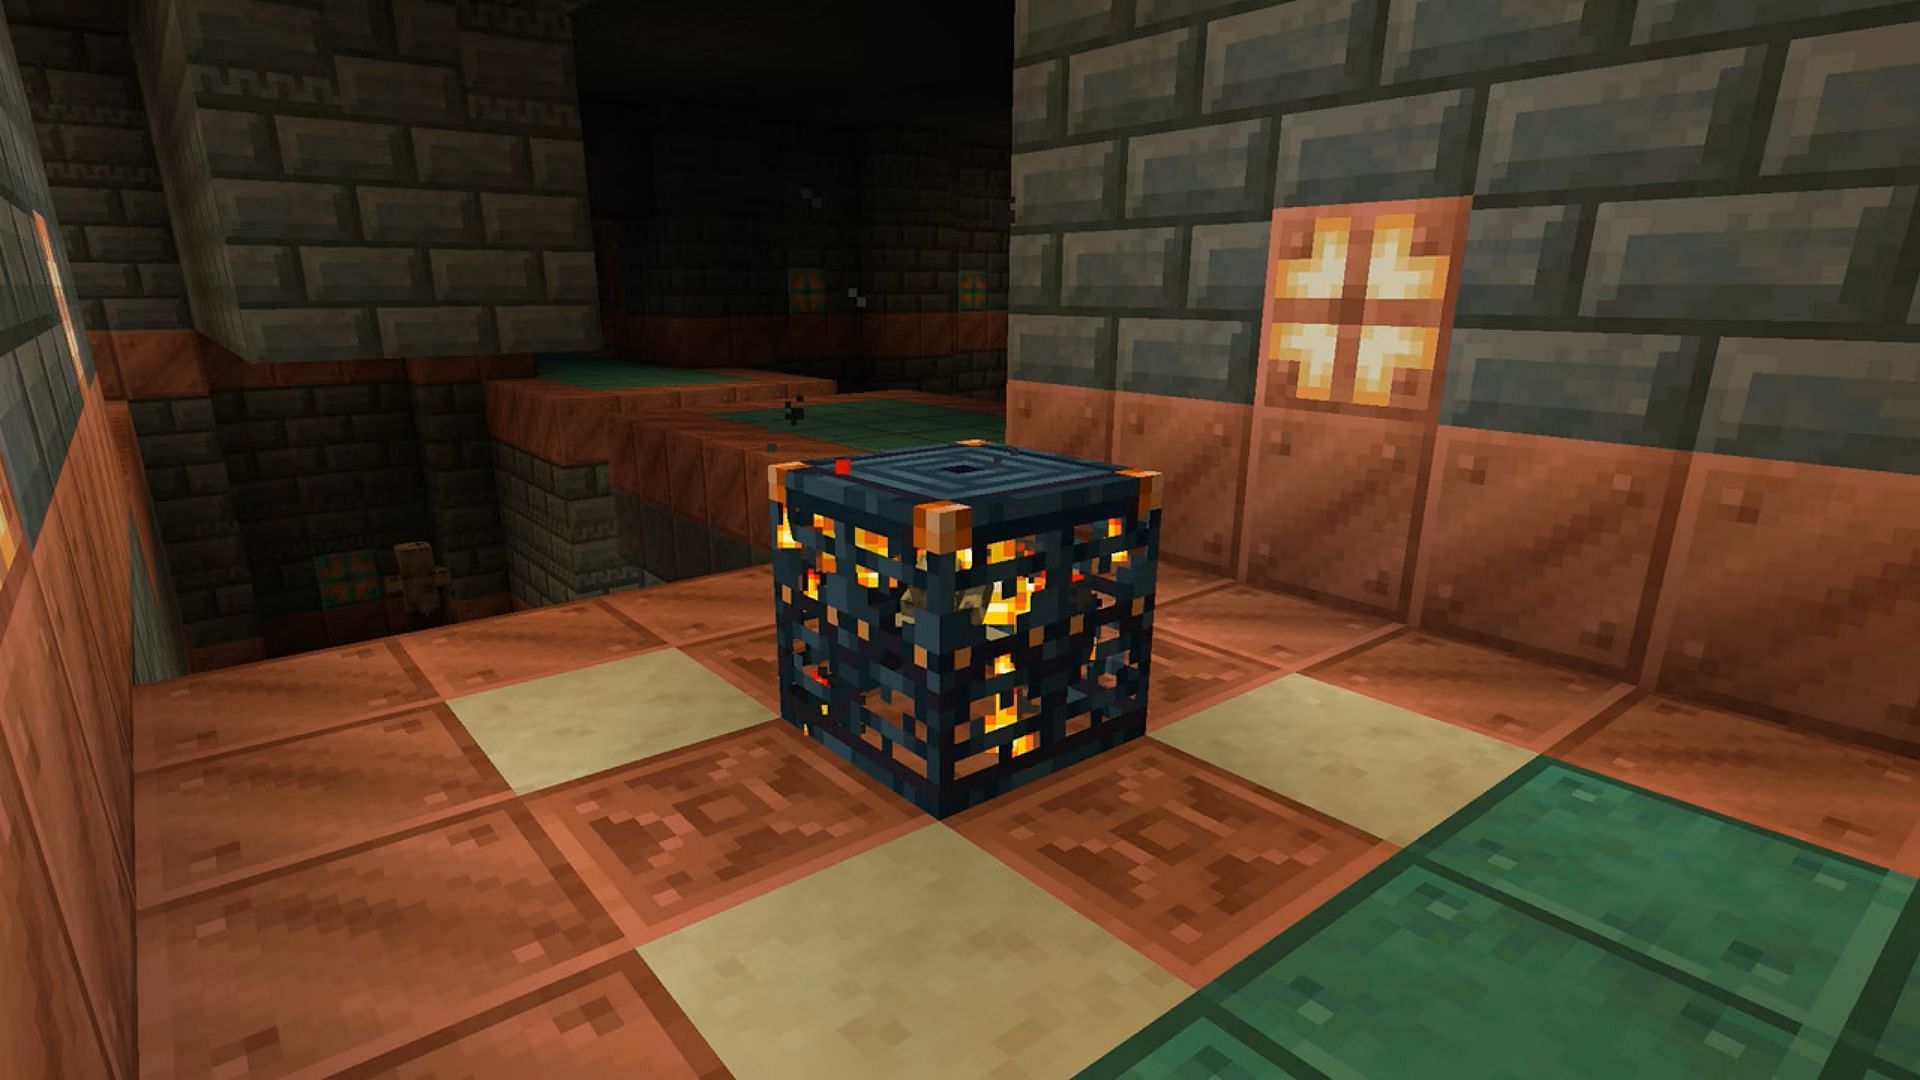 Trial spawners will drop certain rewards after players defeat enemies spawning from it in Minecraft (Image via Mojang)